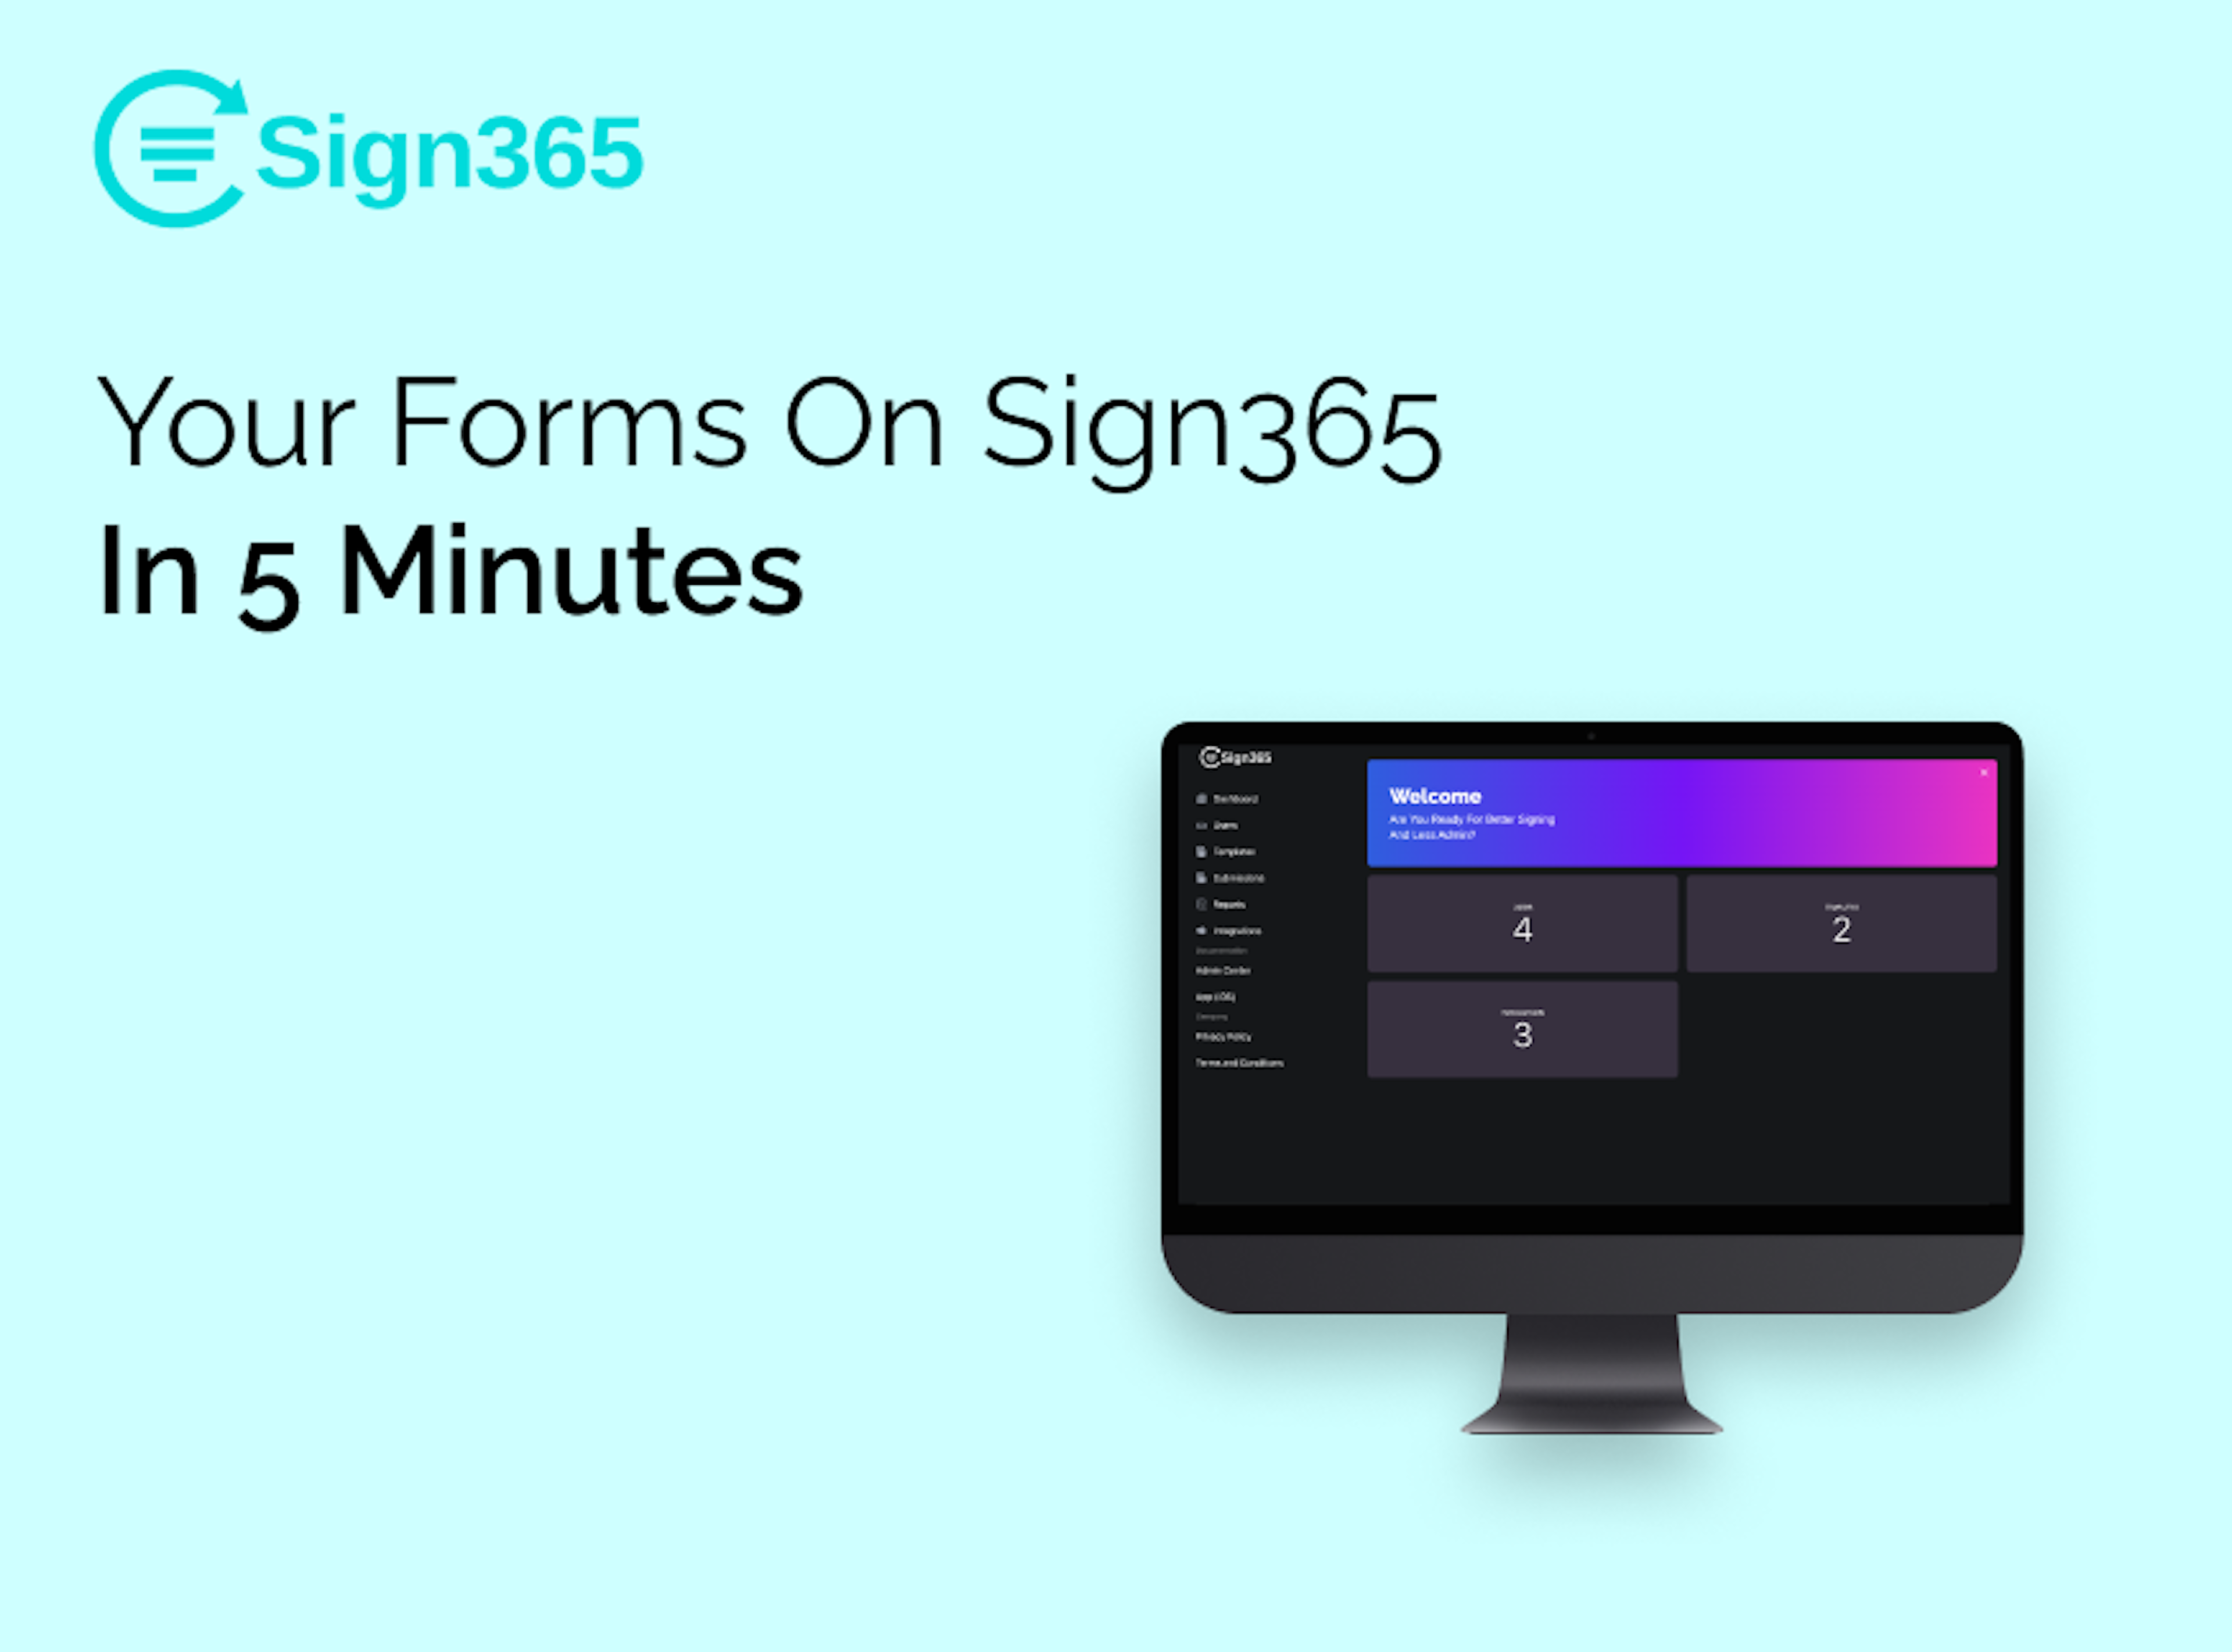 Your Forms On Sign365 In 5 Minutes